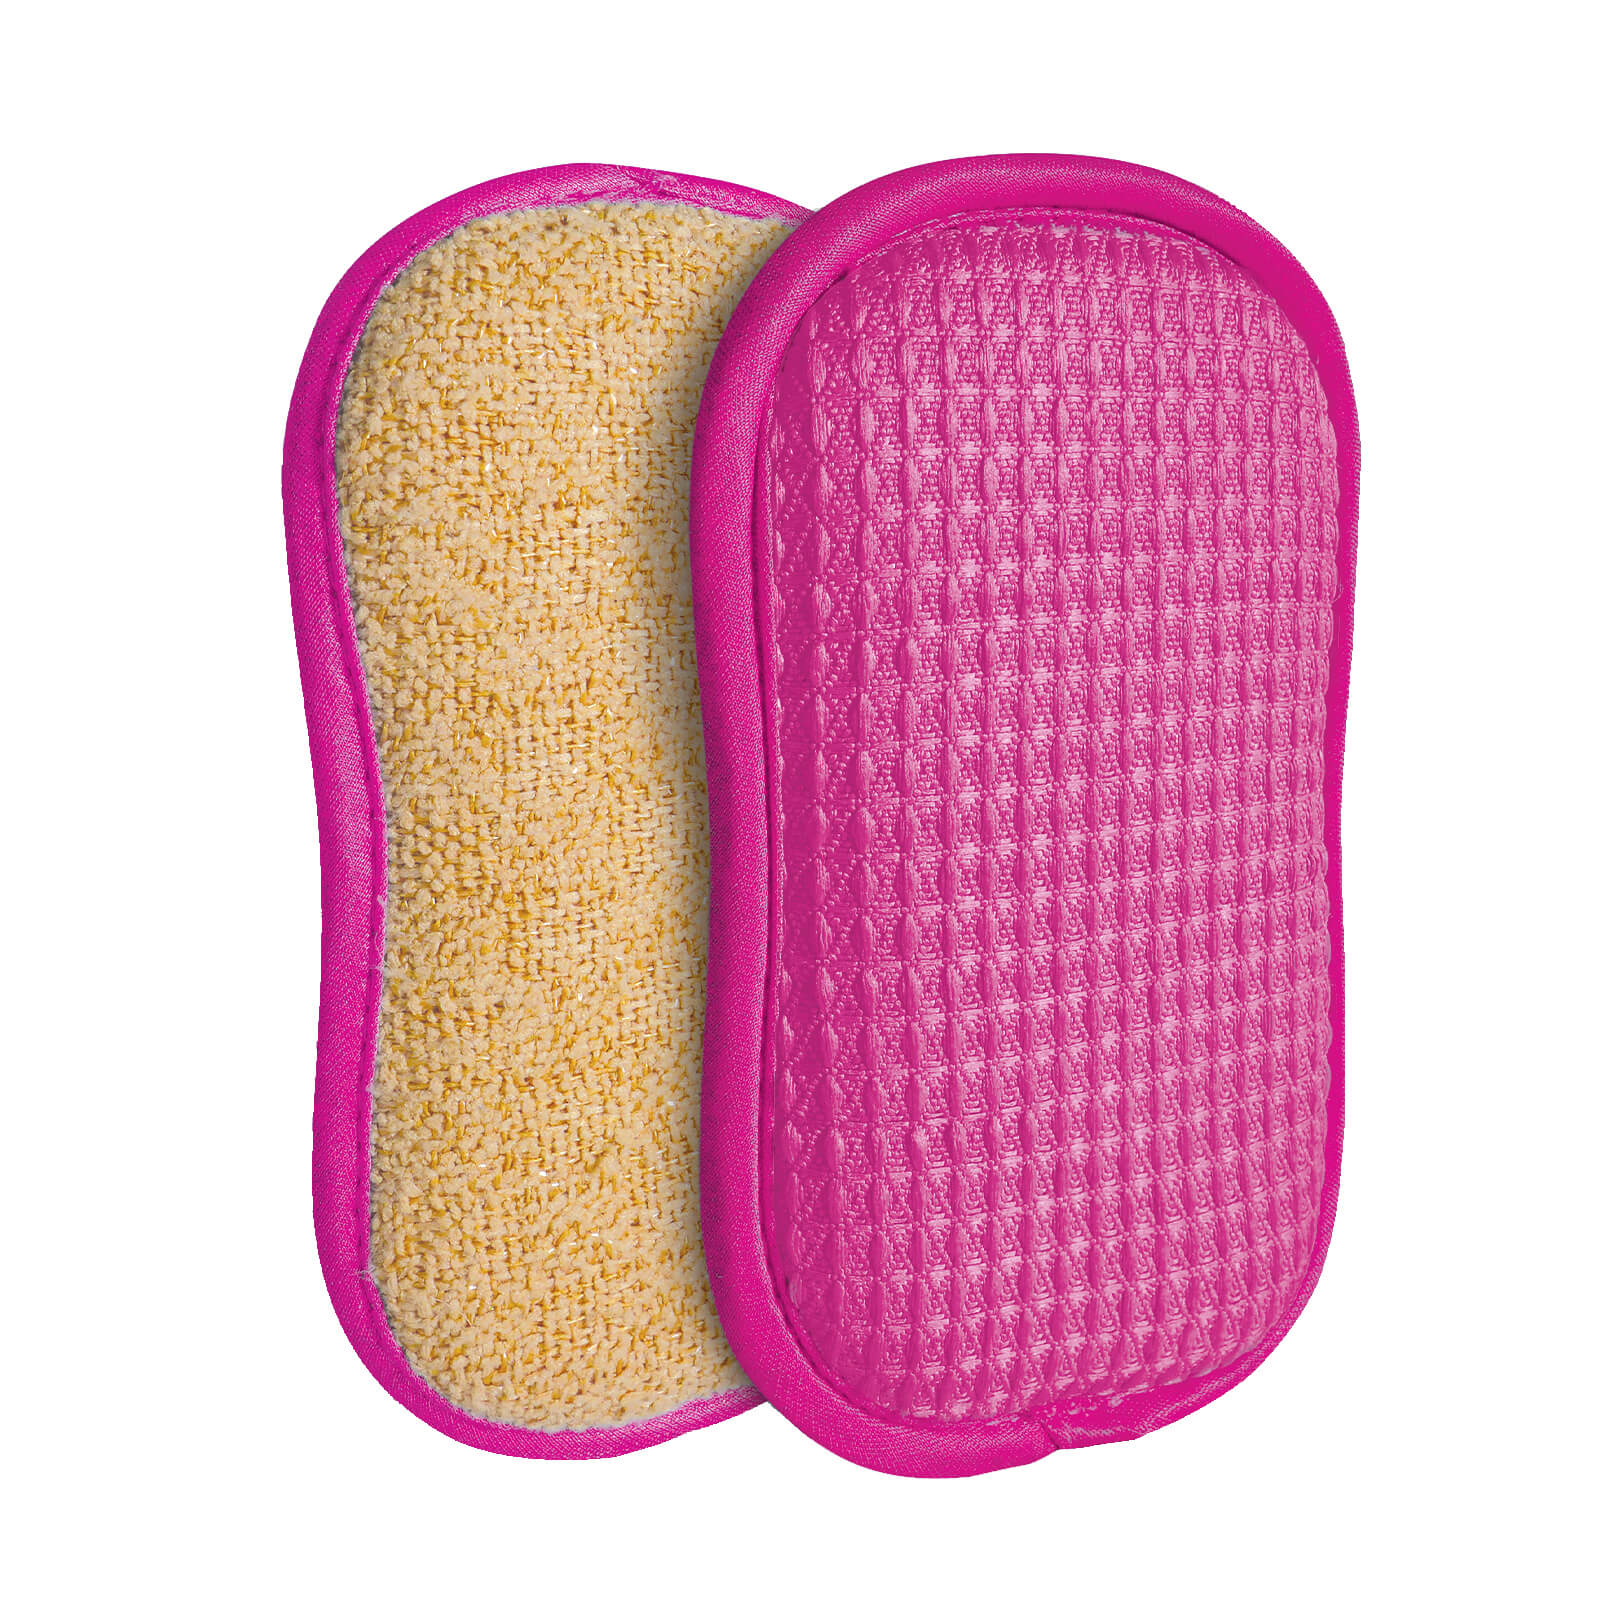 Dual Action Microfibre Cleaning Pads - Set of 2